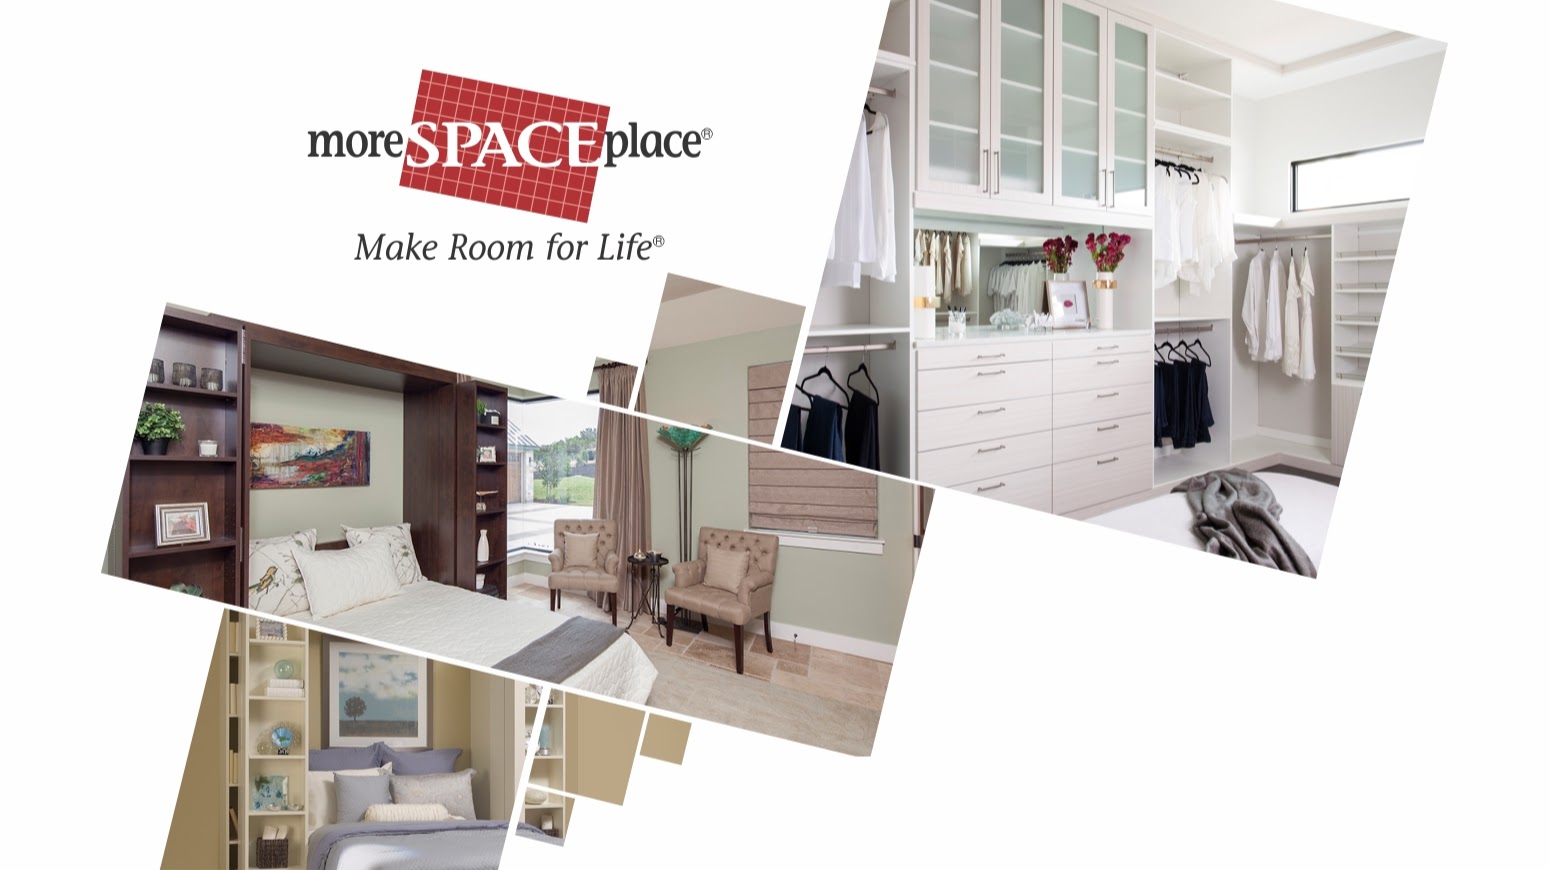 More Space Place - Wilmington, NC